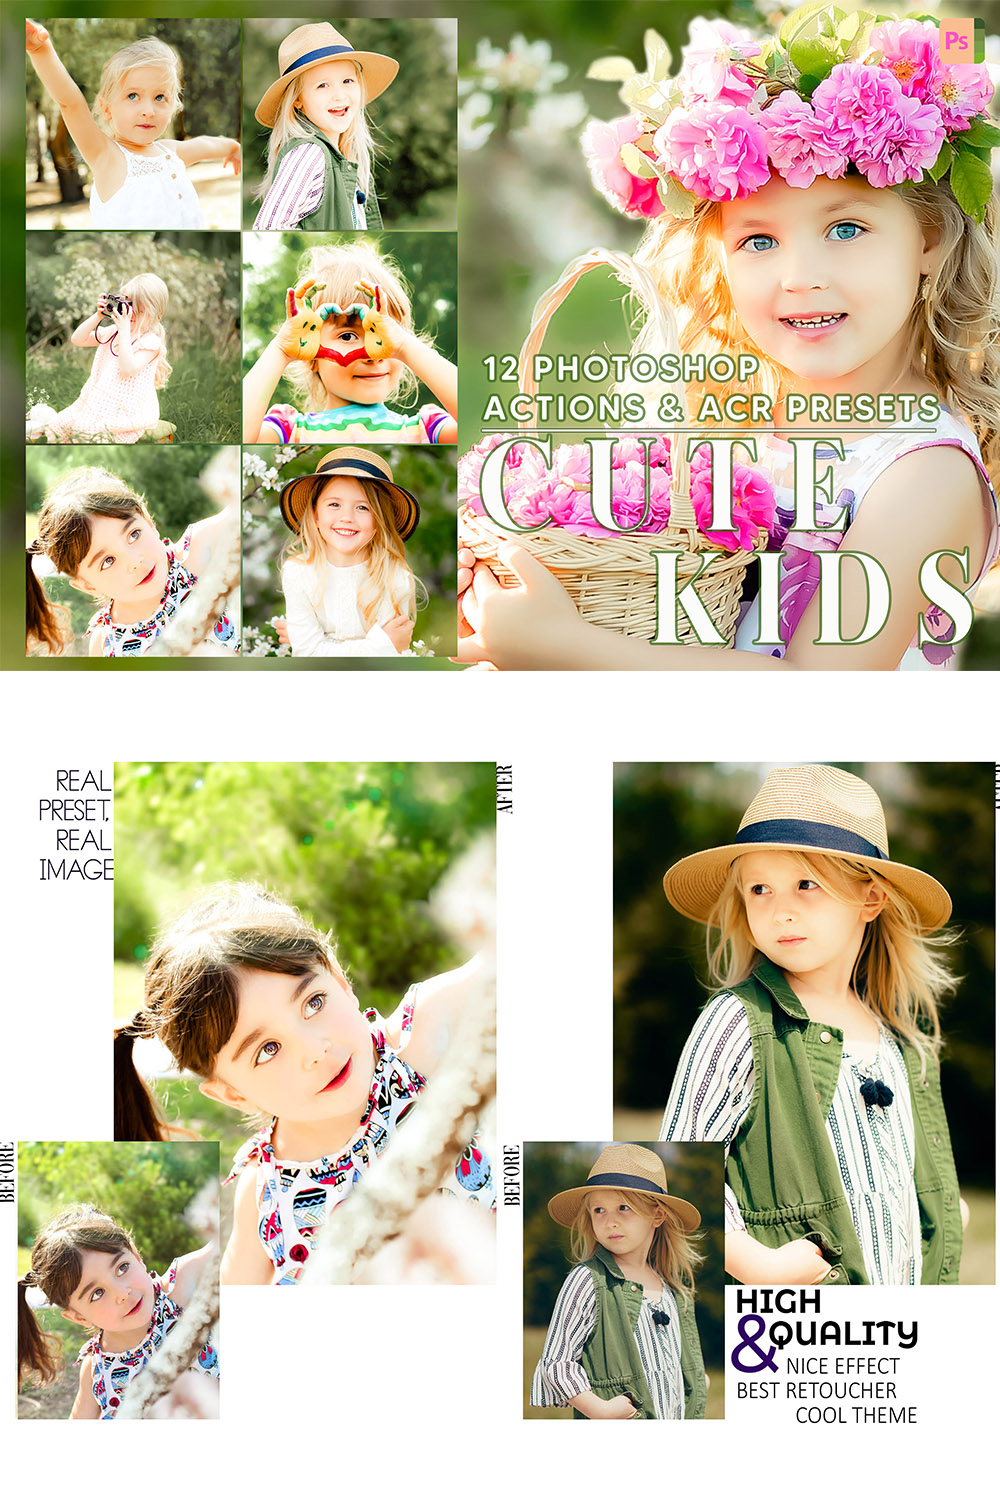 12 Photoshop Actions, Cute Kids Ps Action, Bright ACR Preset, Children Ps Filter, Portrait And Lifestyle Theme For Instagram, Blogger pinterest preview image.